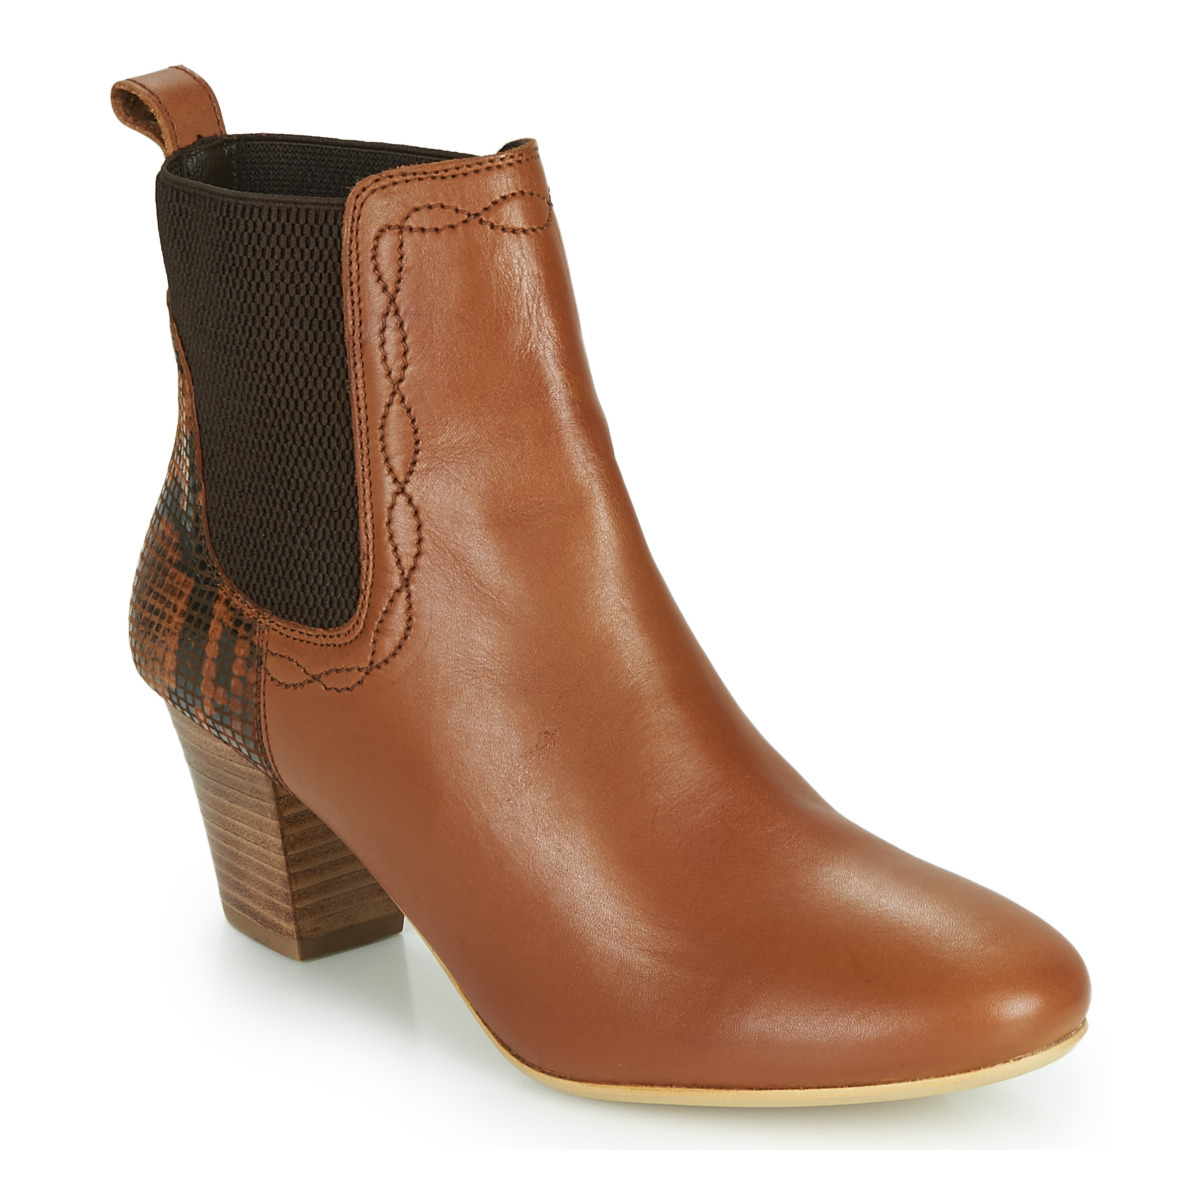 Ravel - Ankle Boots in Brown at Spartoo GOOFASH